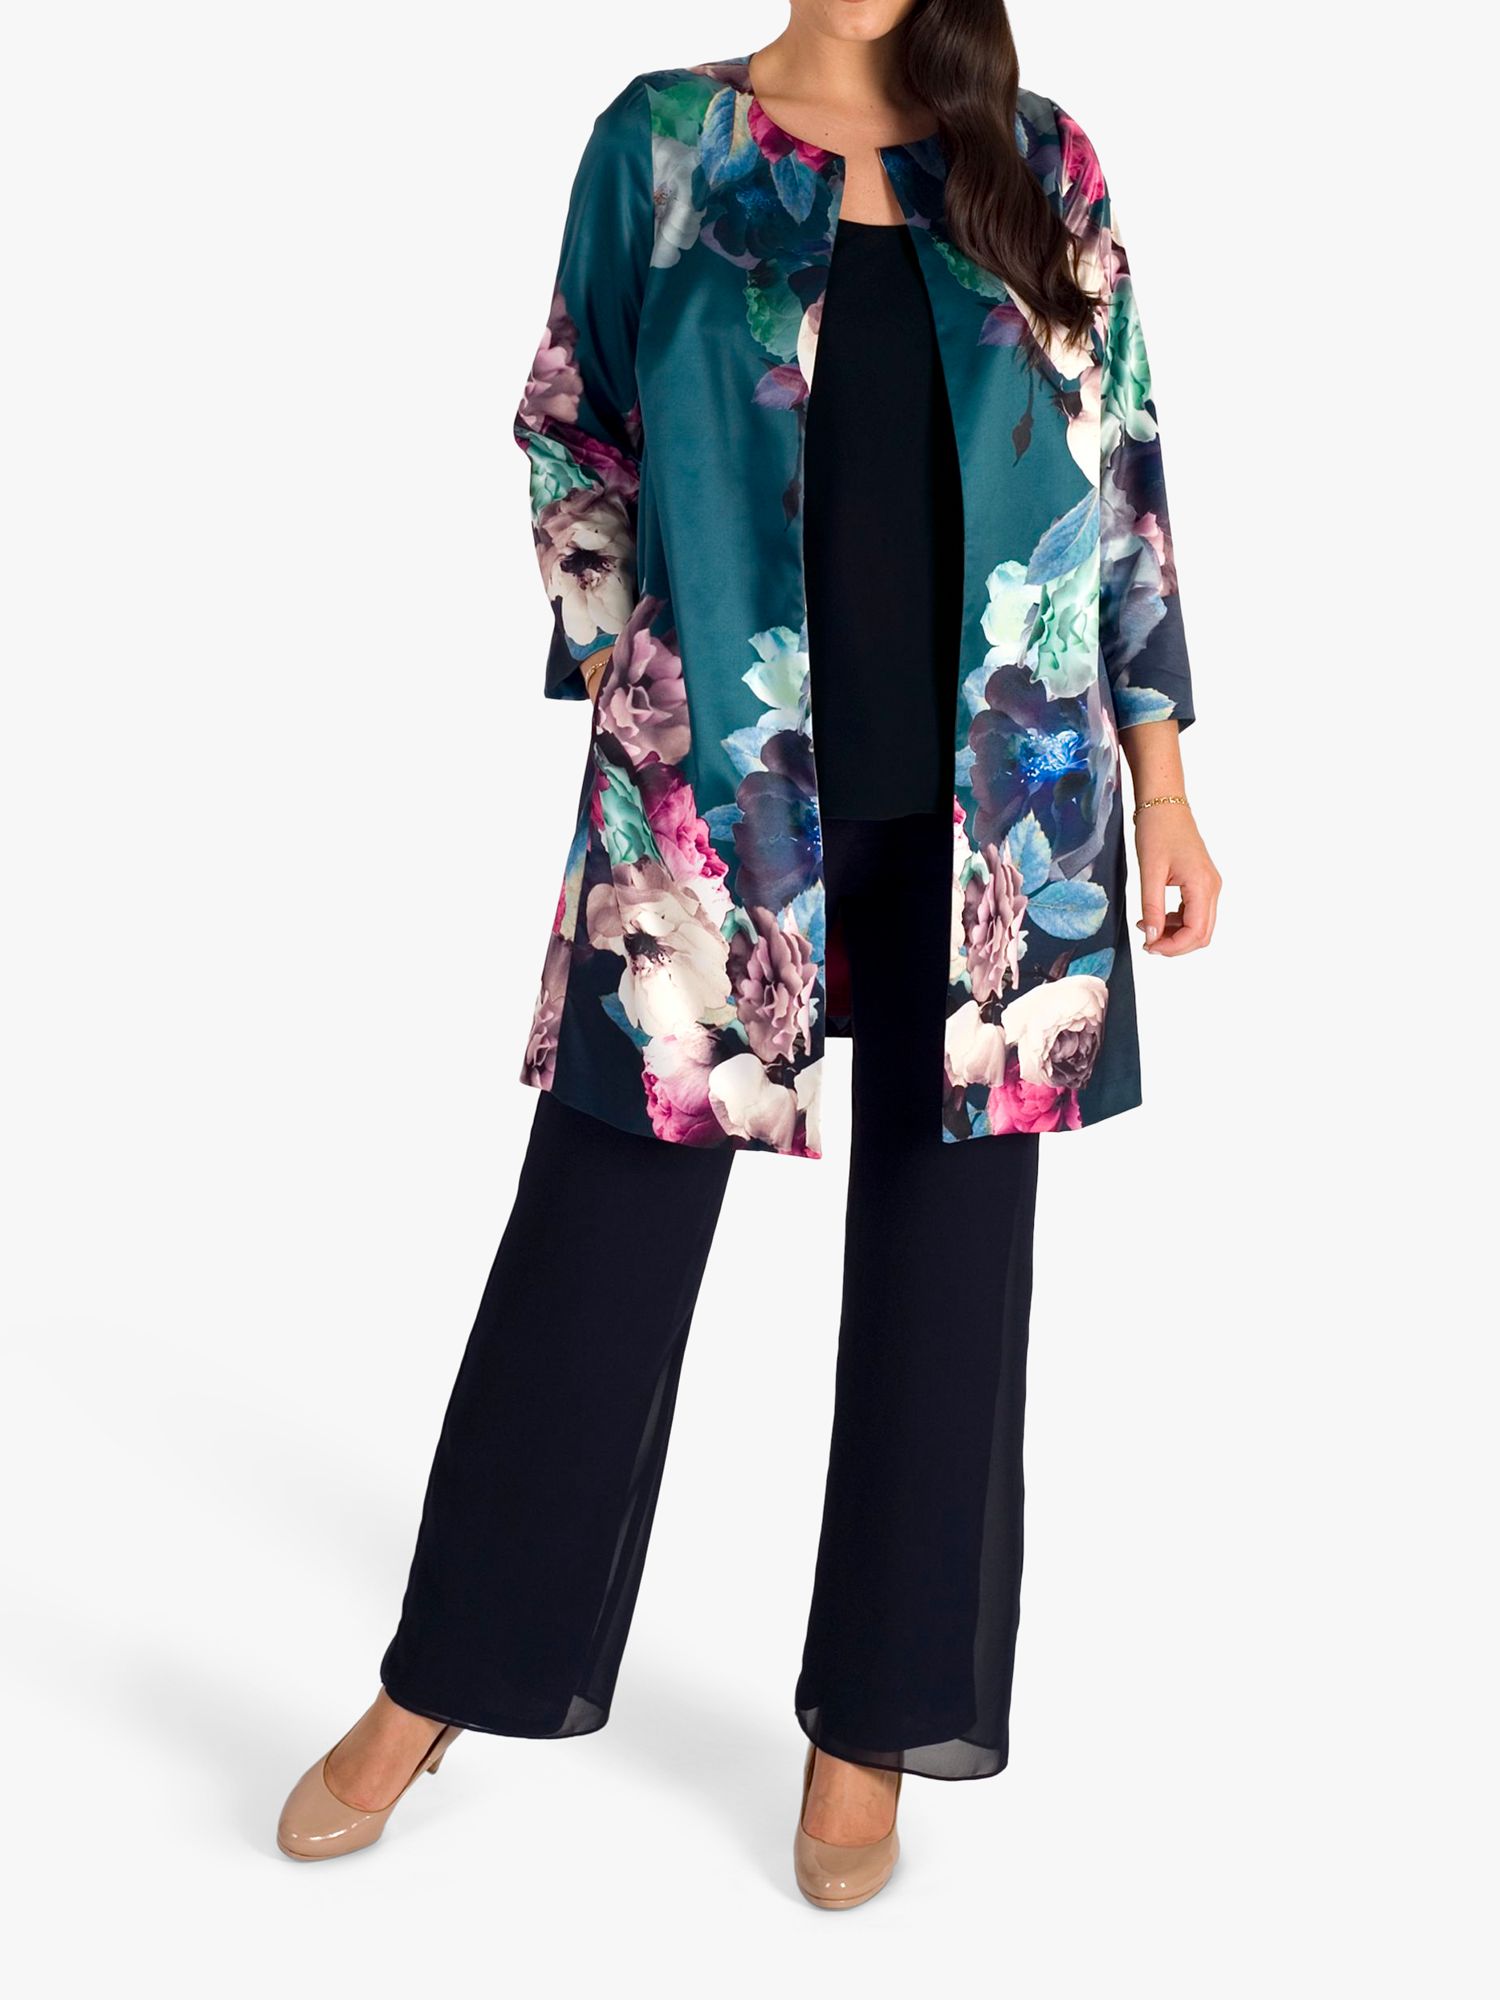 Buy Chesca Satin Trim Chiffon Trousers Online at johnlewis.com